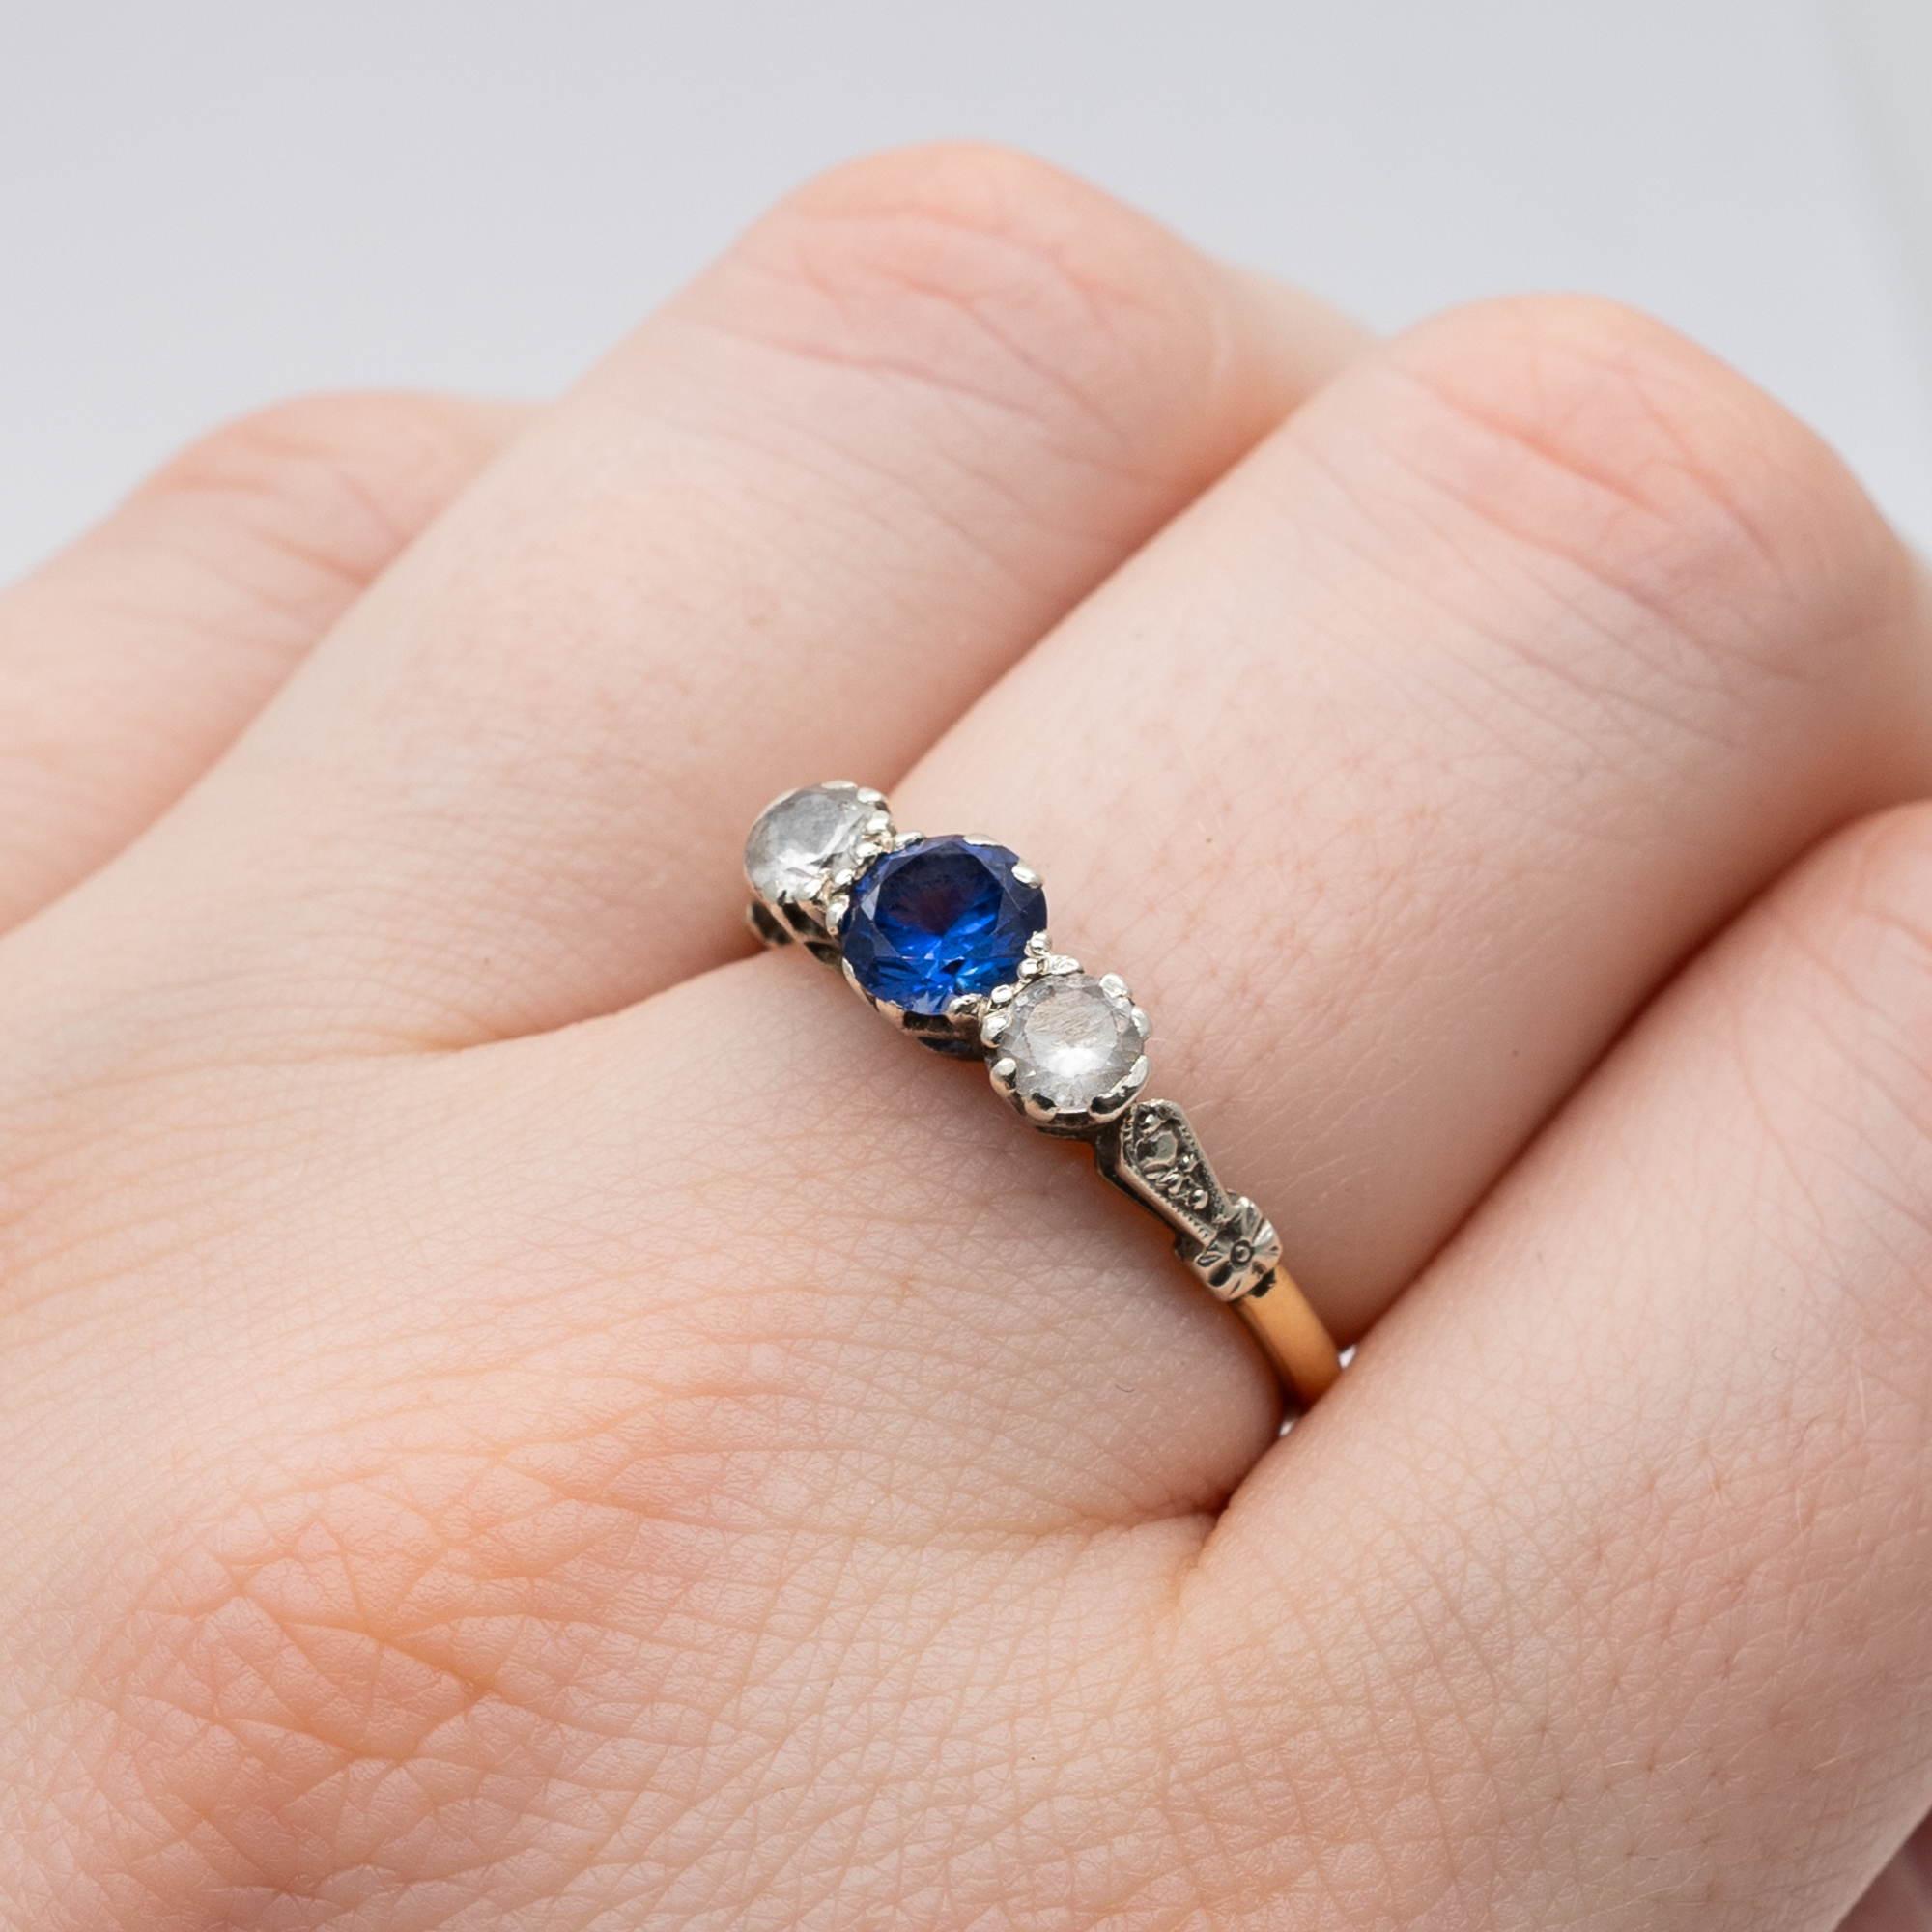 A 9ct yellow gold cz blue stone ring - Image 5 of 6